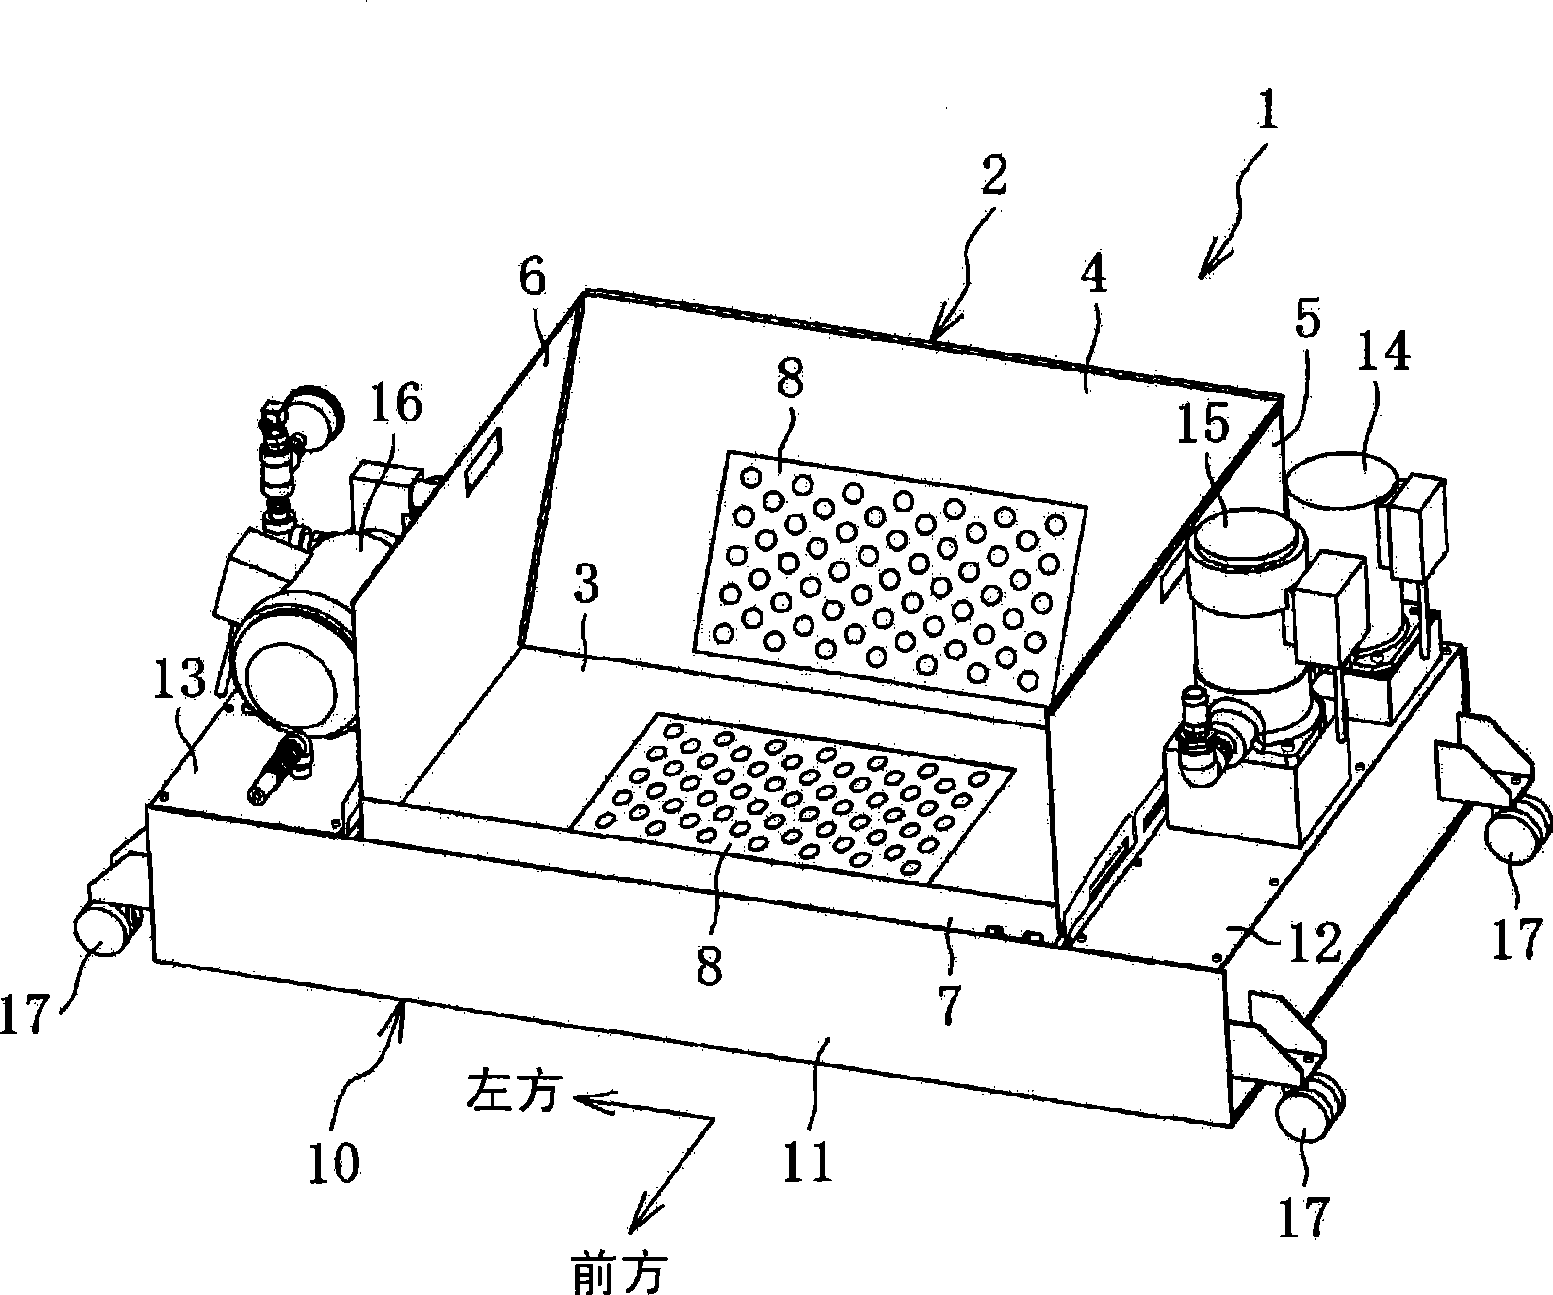 Device for filtering cutting fluid